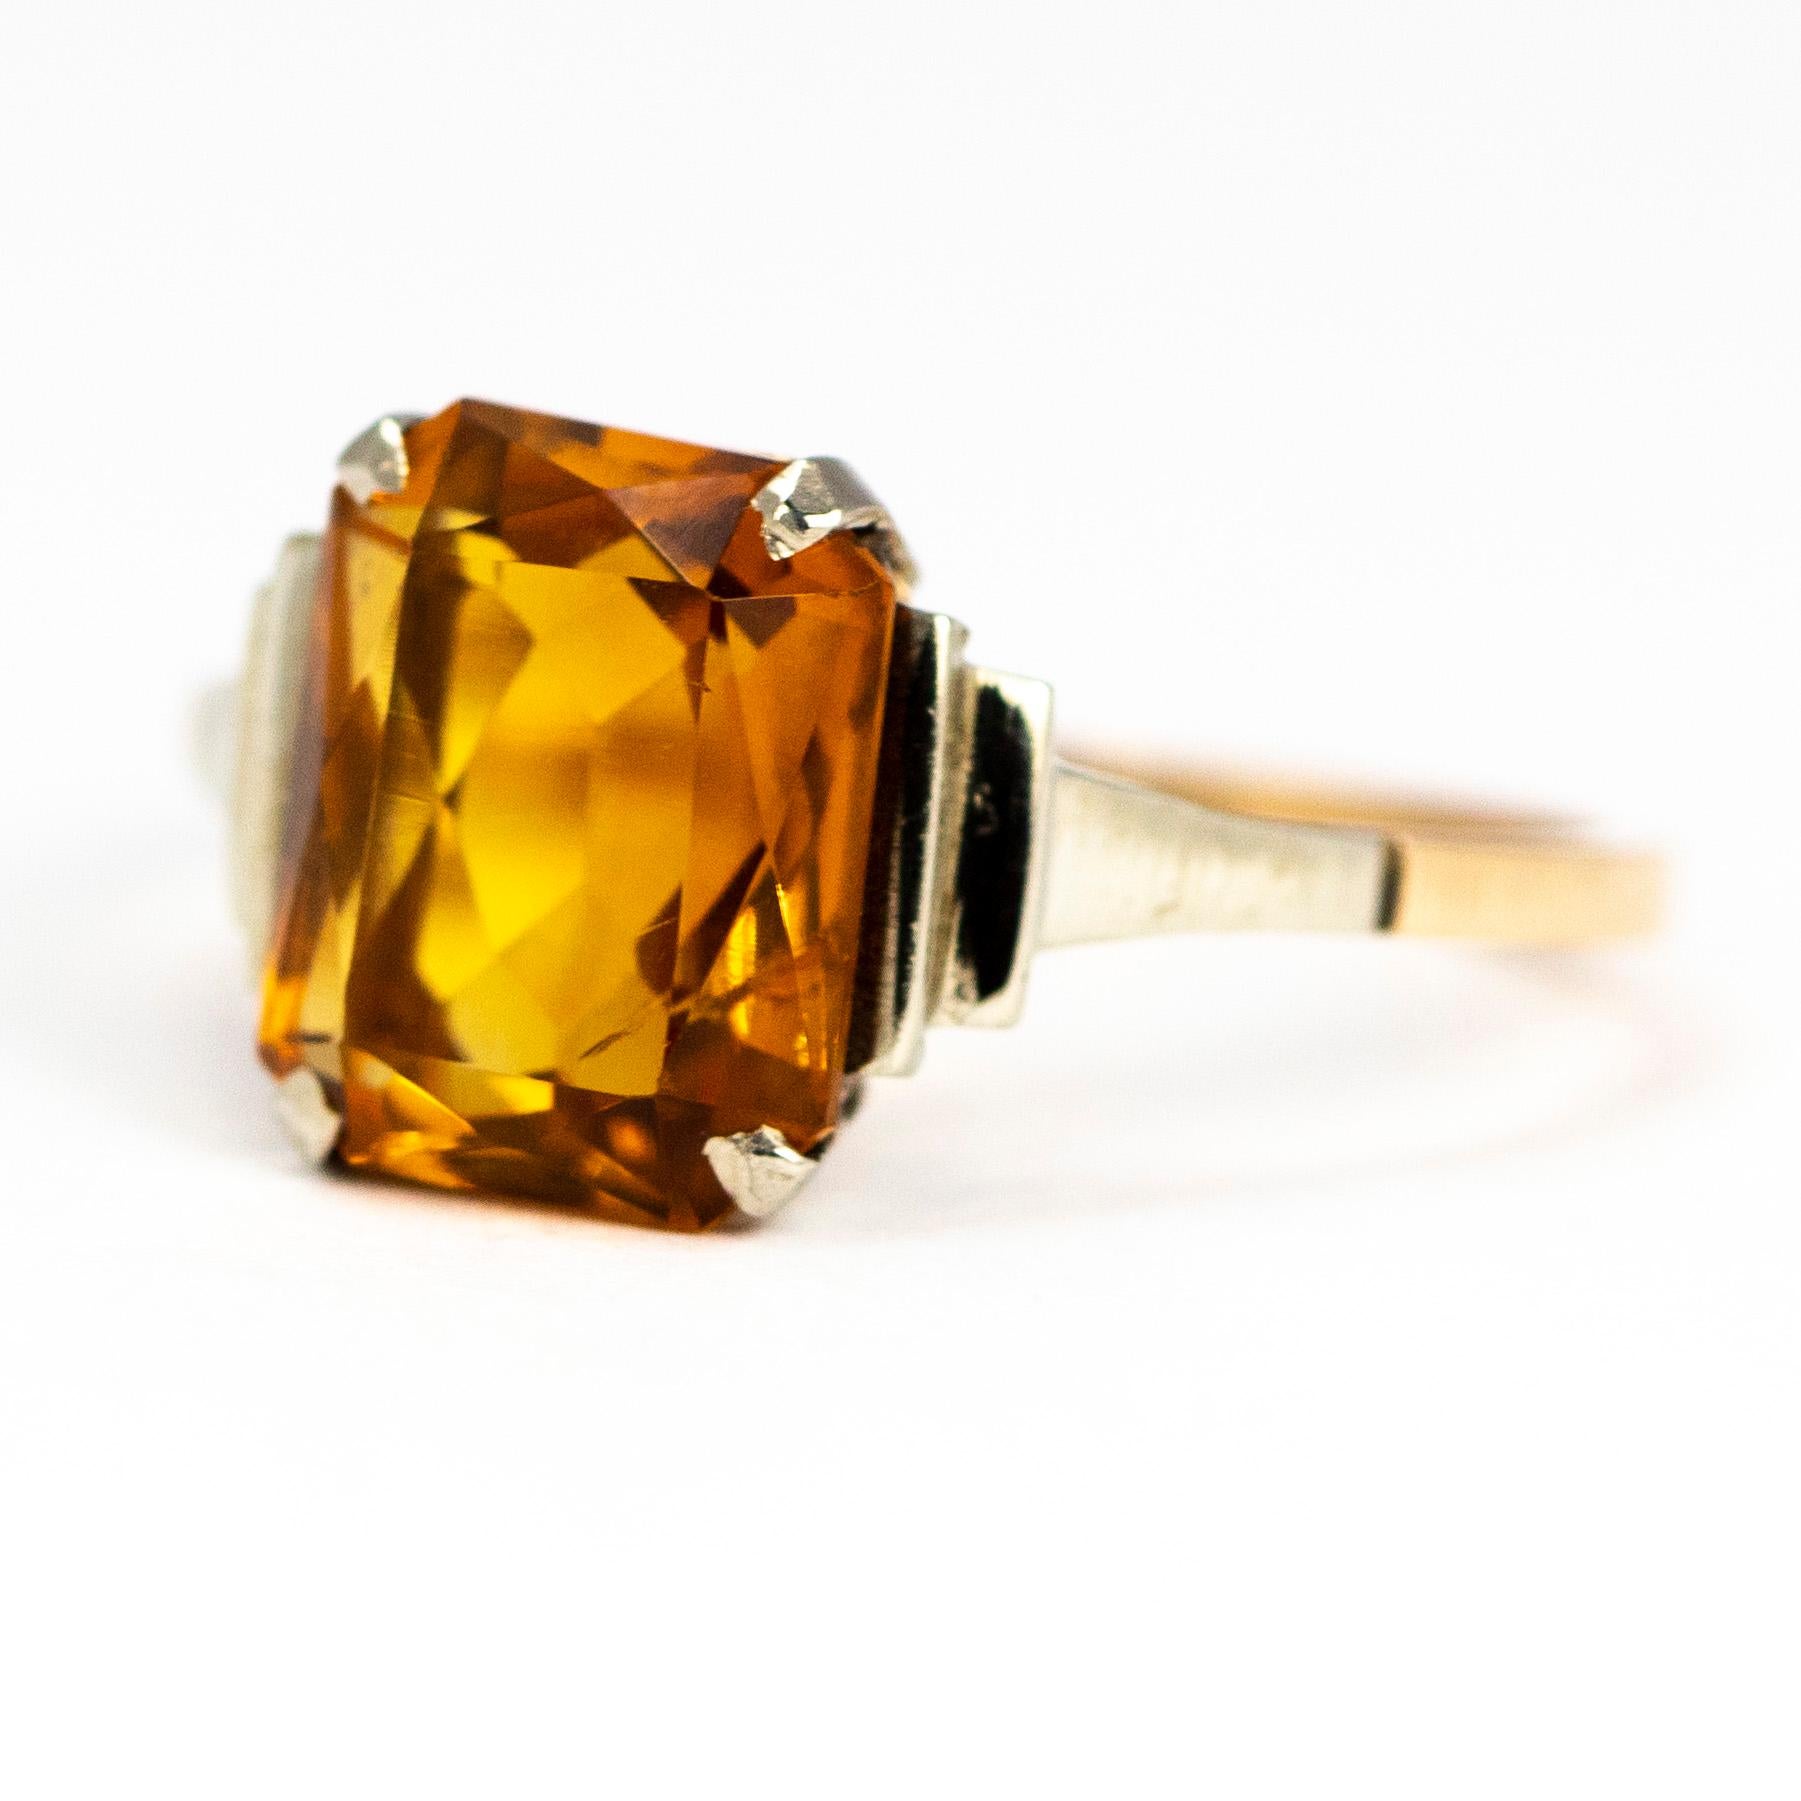 The Art Deco style to this ring is gorgeous, it has step detail either side of the 3carat Citrine stone. The stone is set in white gold and the rest of the ring is modelled in 9ct gold. 

Ring Size: O 1/2 or 7 1/2 
Stone Dimensions: 10 x 8mm